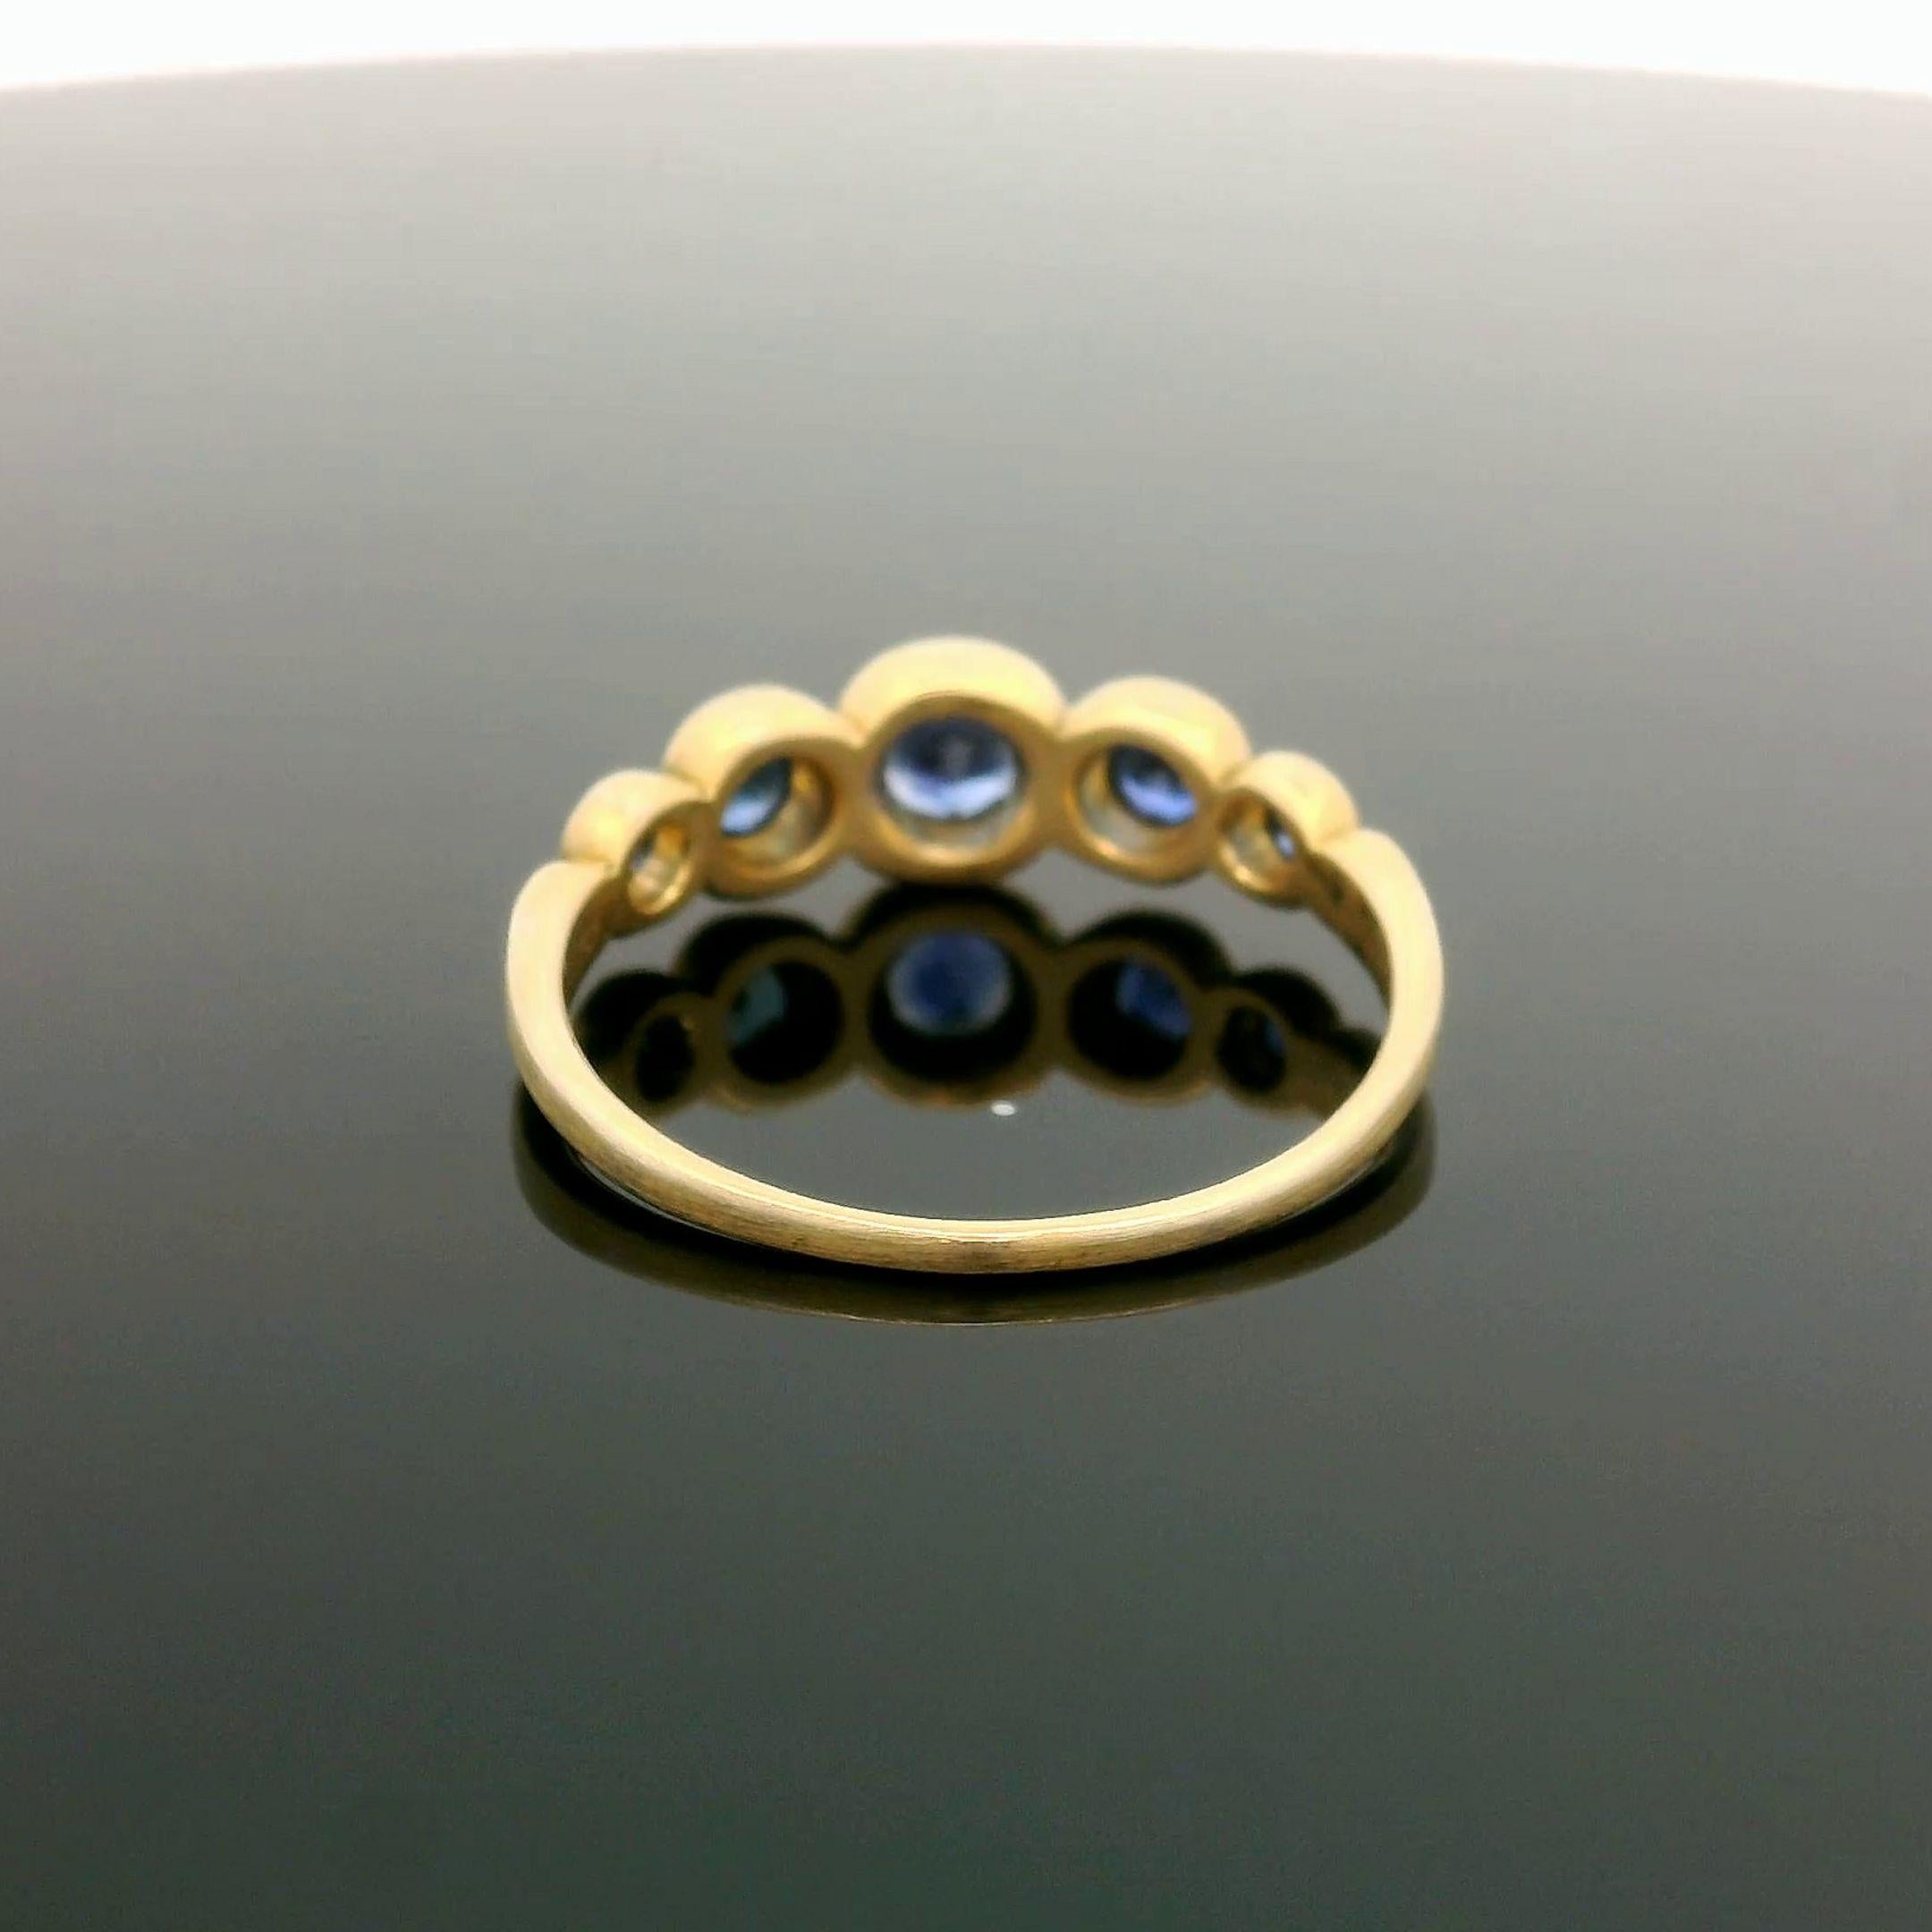 –Stone(s)–
(5) Natural Genuine Sapphire - Round Brilliant Cut - Bezel Set - Vivid Brilliant Blue Color  - 0.75ctw (approx.)

Material: 18k Yellow Gold
Weight: 2.72 Grams
Ring Size: 7.0 ( fitted on finger, please contact us prior to purchase with